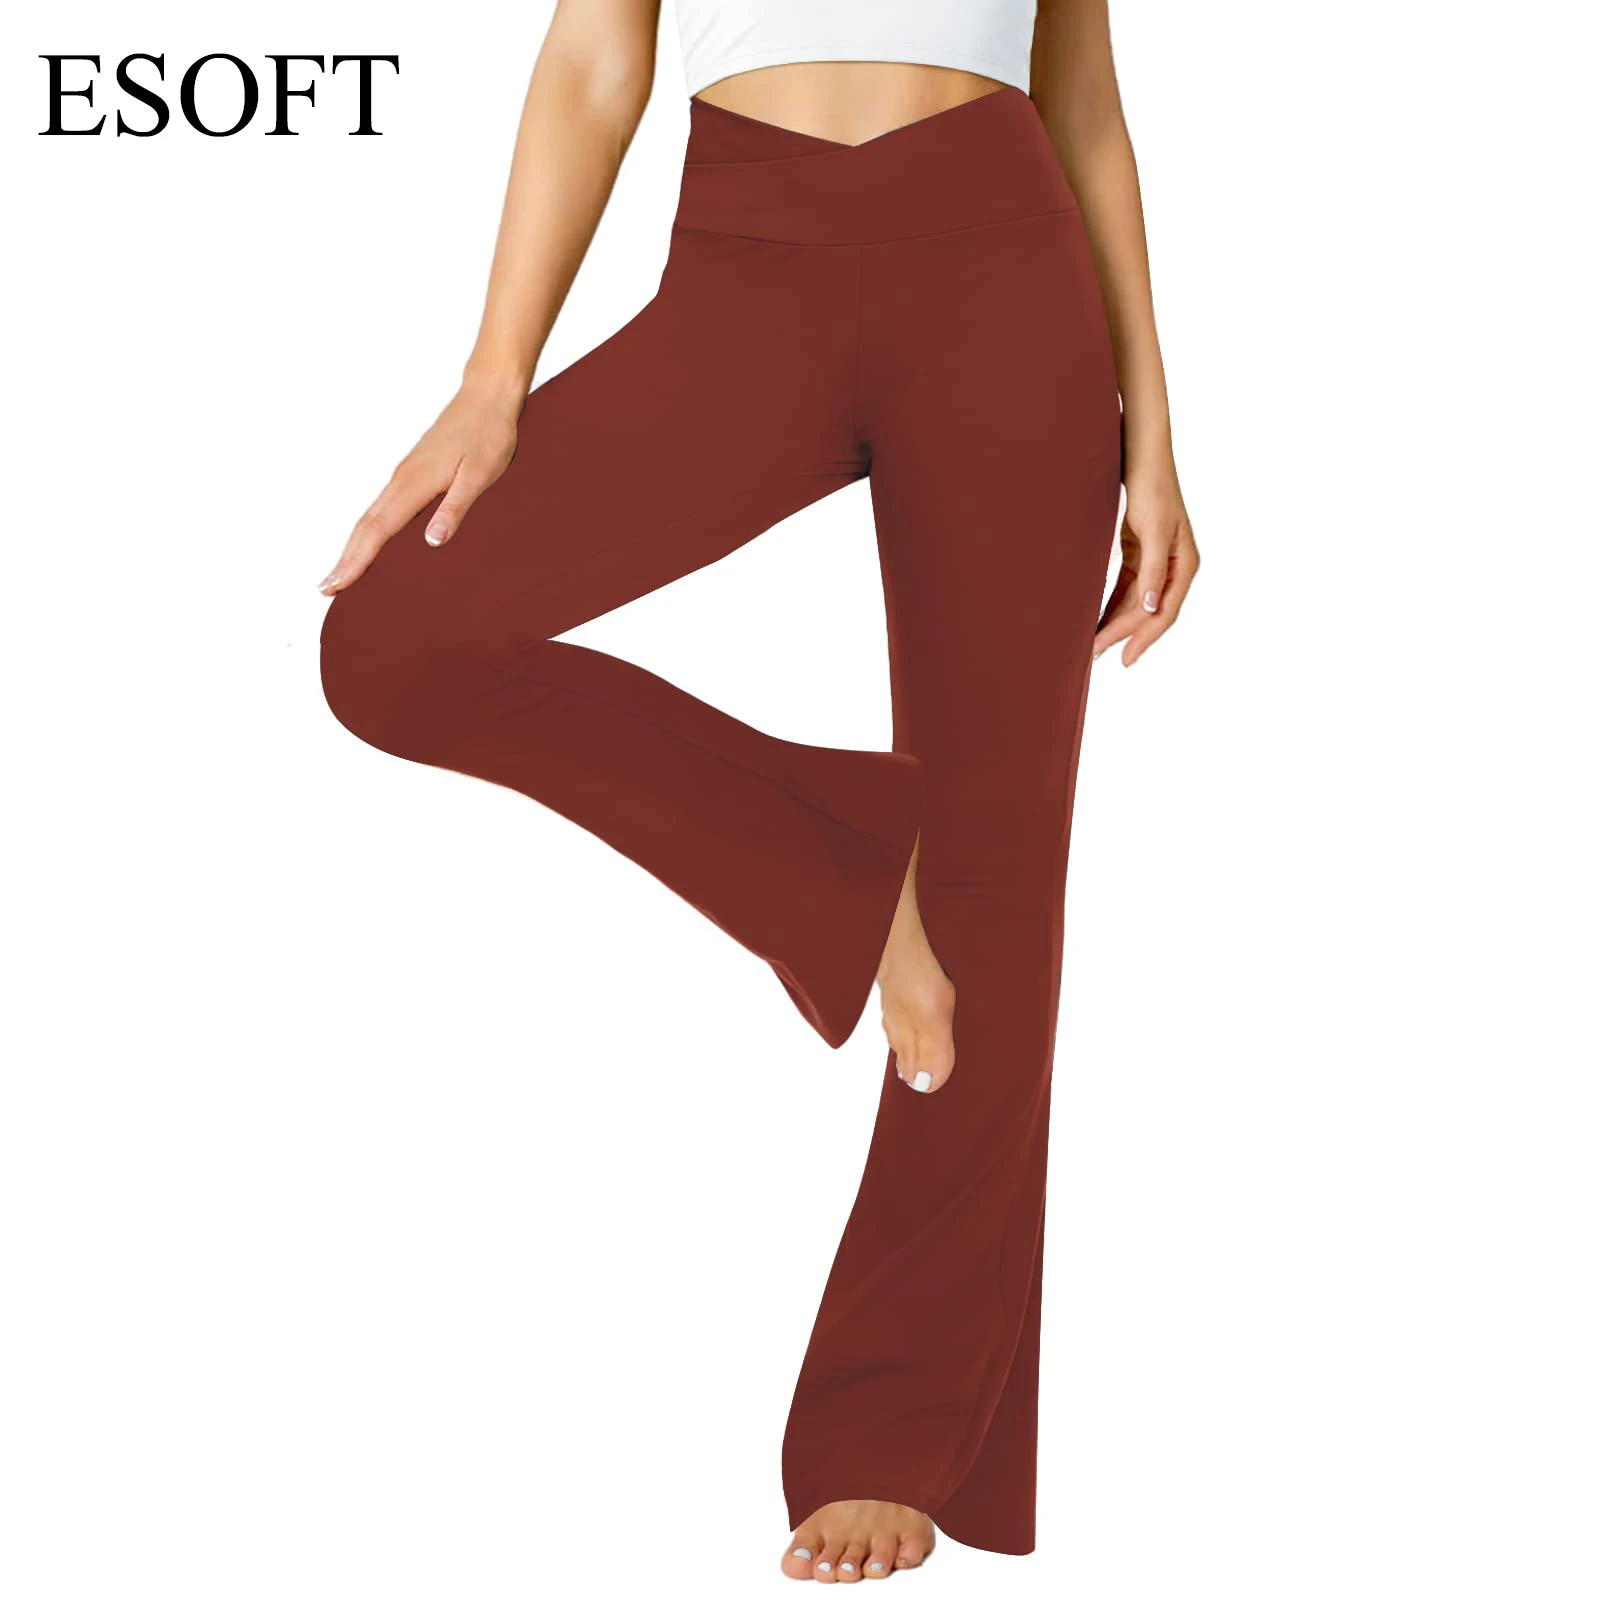 

ESOFT Women's Bootcut High Waisted Causal Pants Stretch Long Solid Wide Leg Pants Trousers